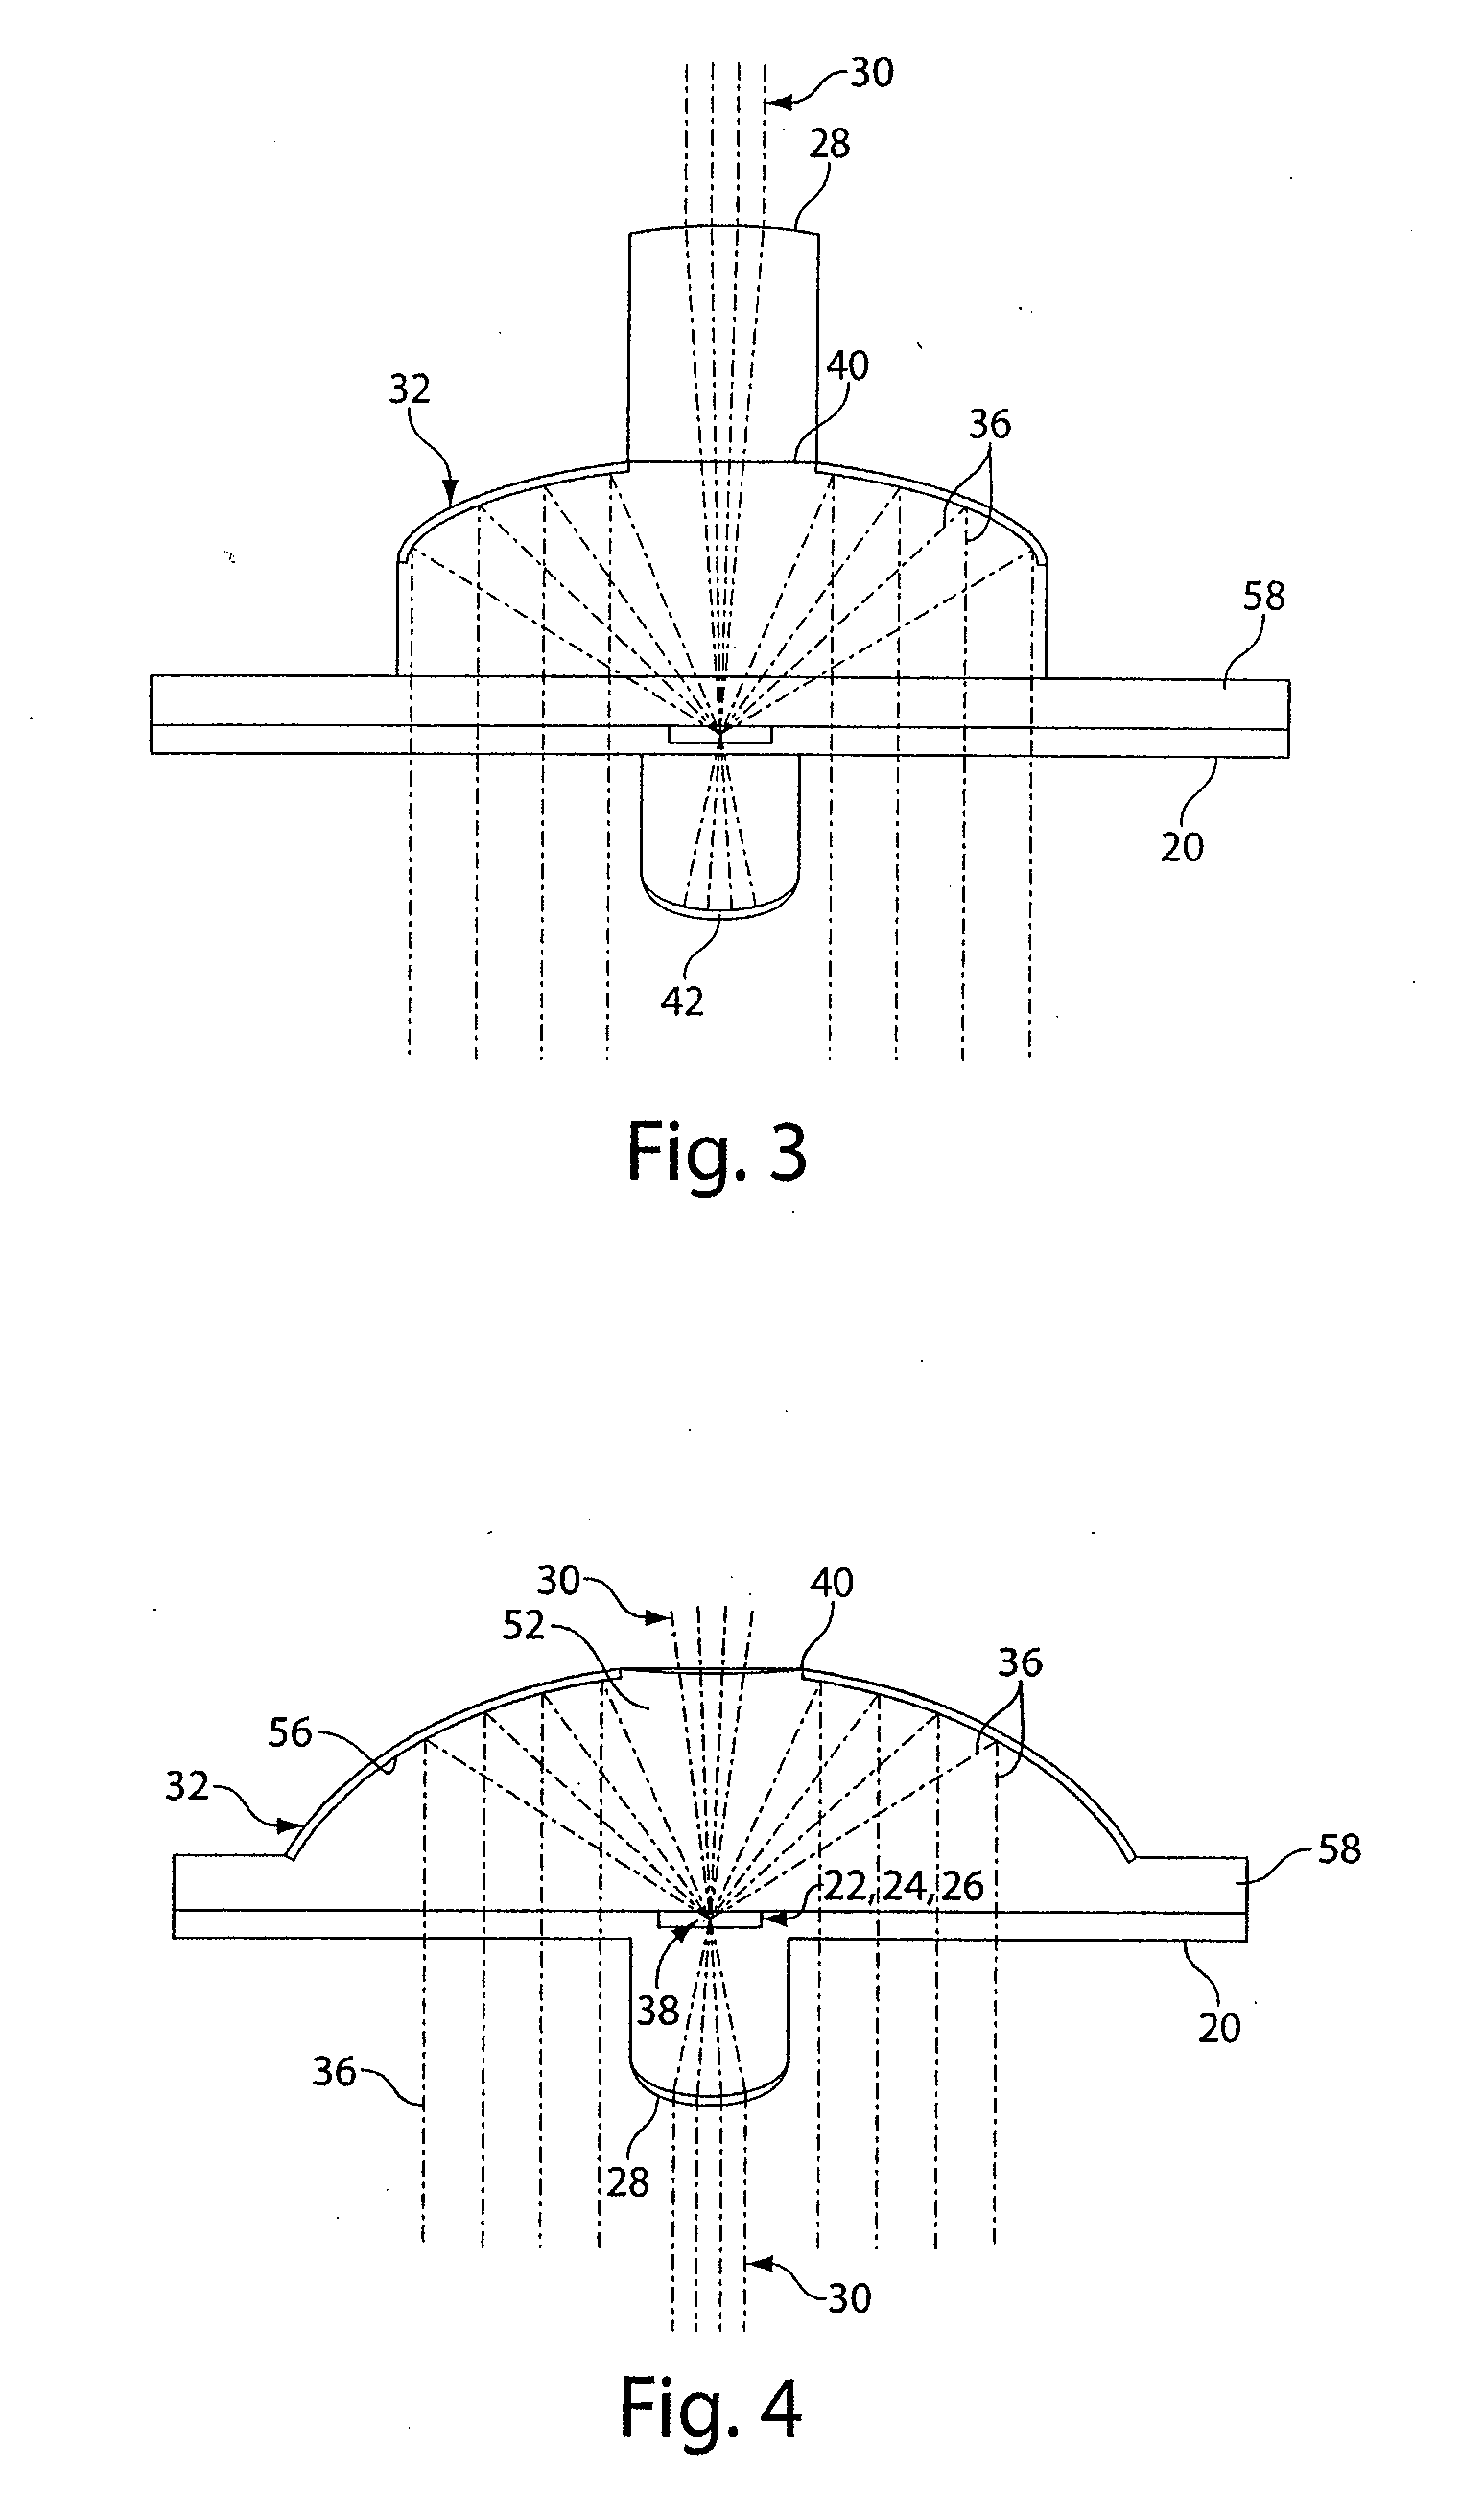 Systems and methods for measurement optimization